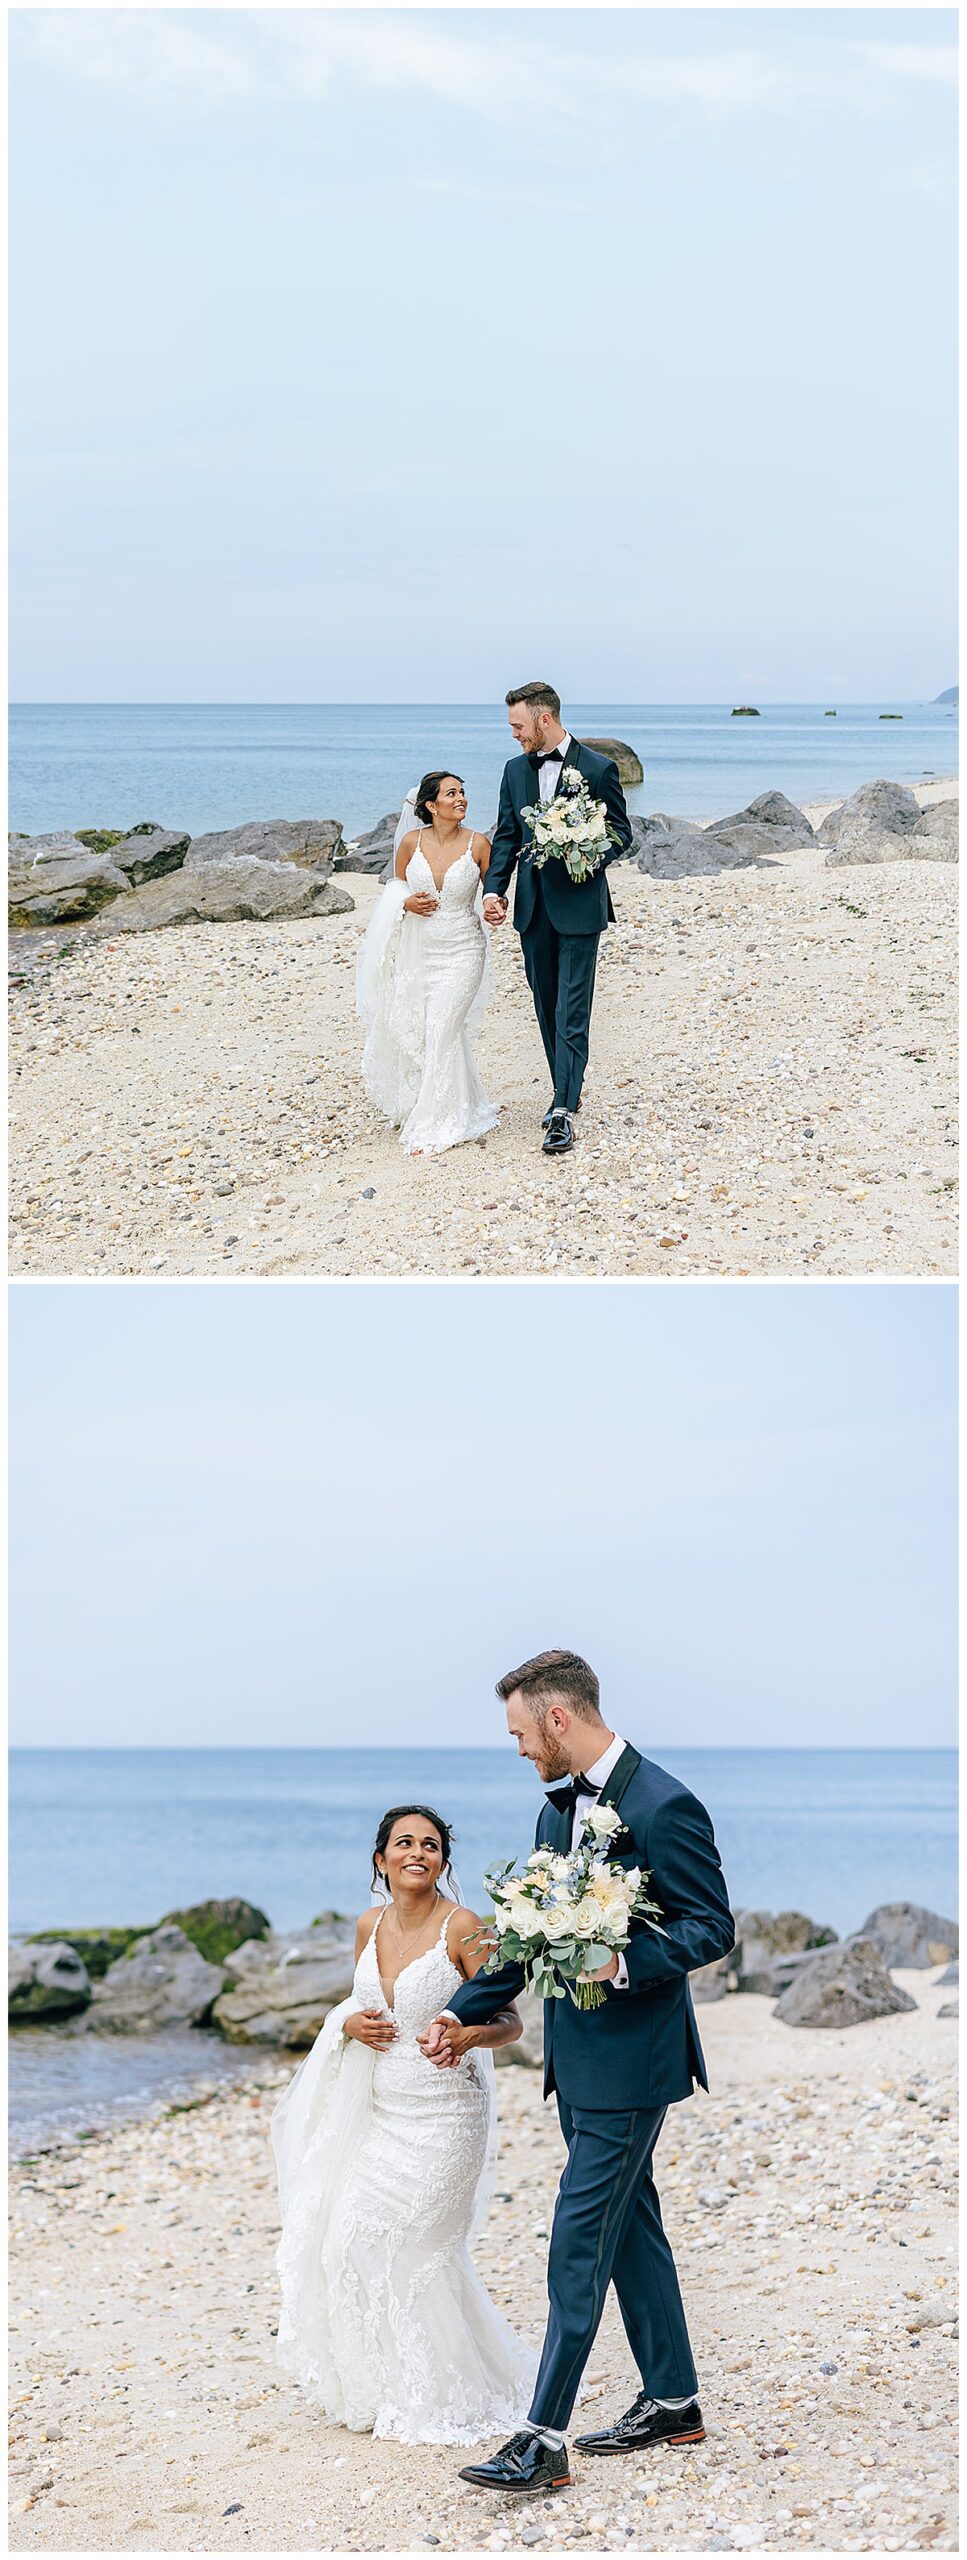 Couple walk together near the water for Kayla Bouren Photography